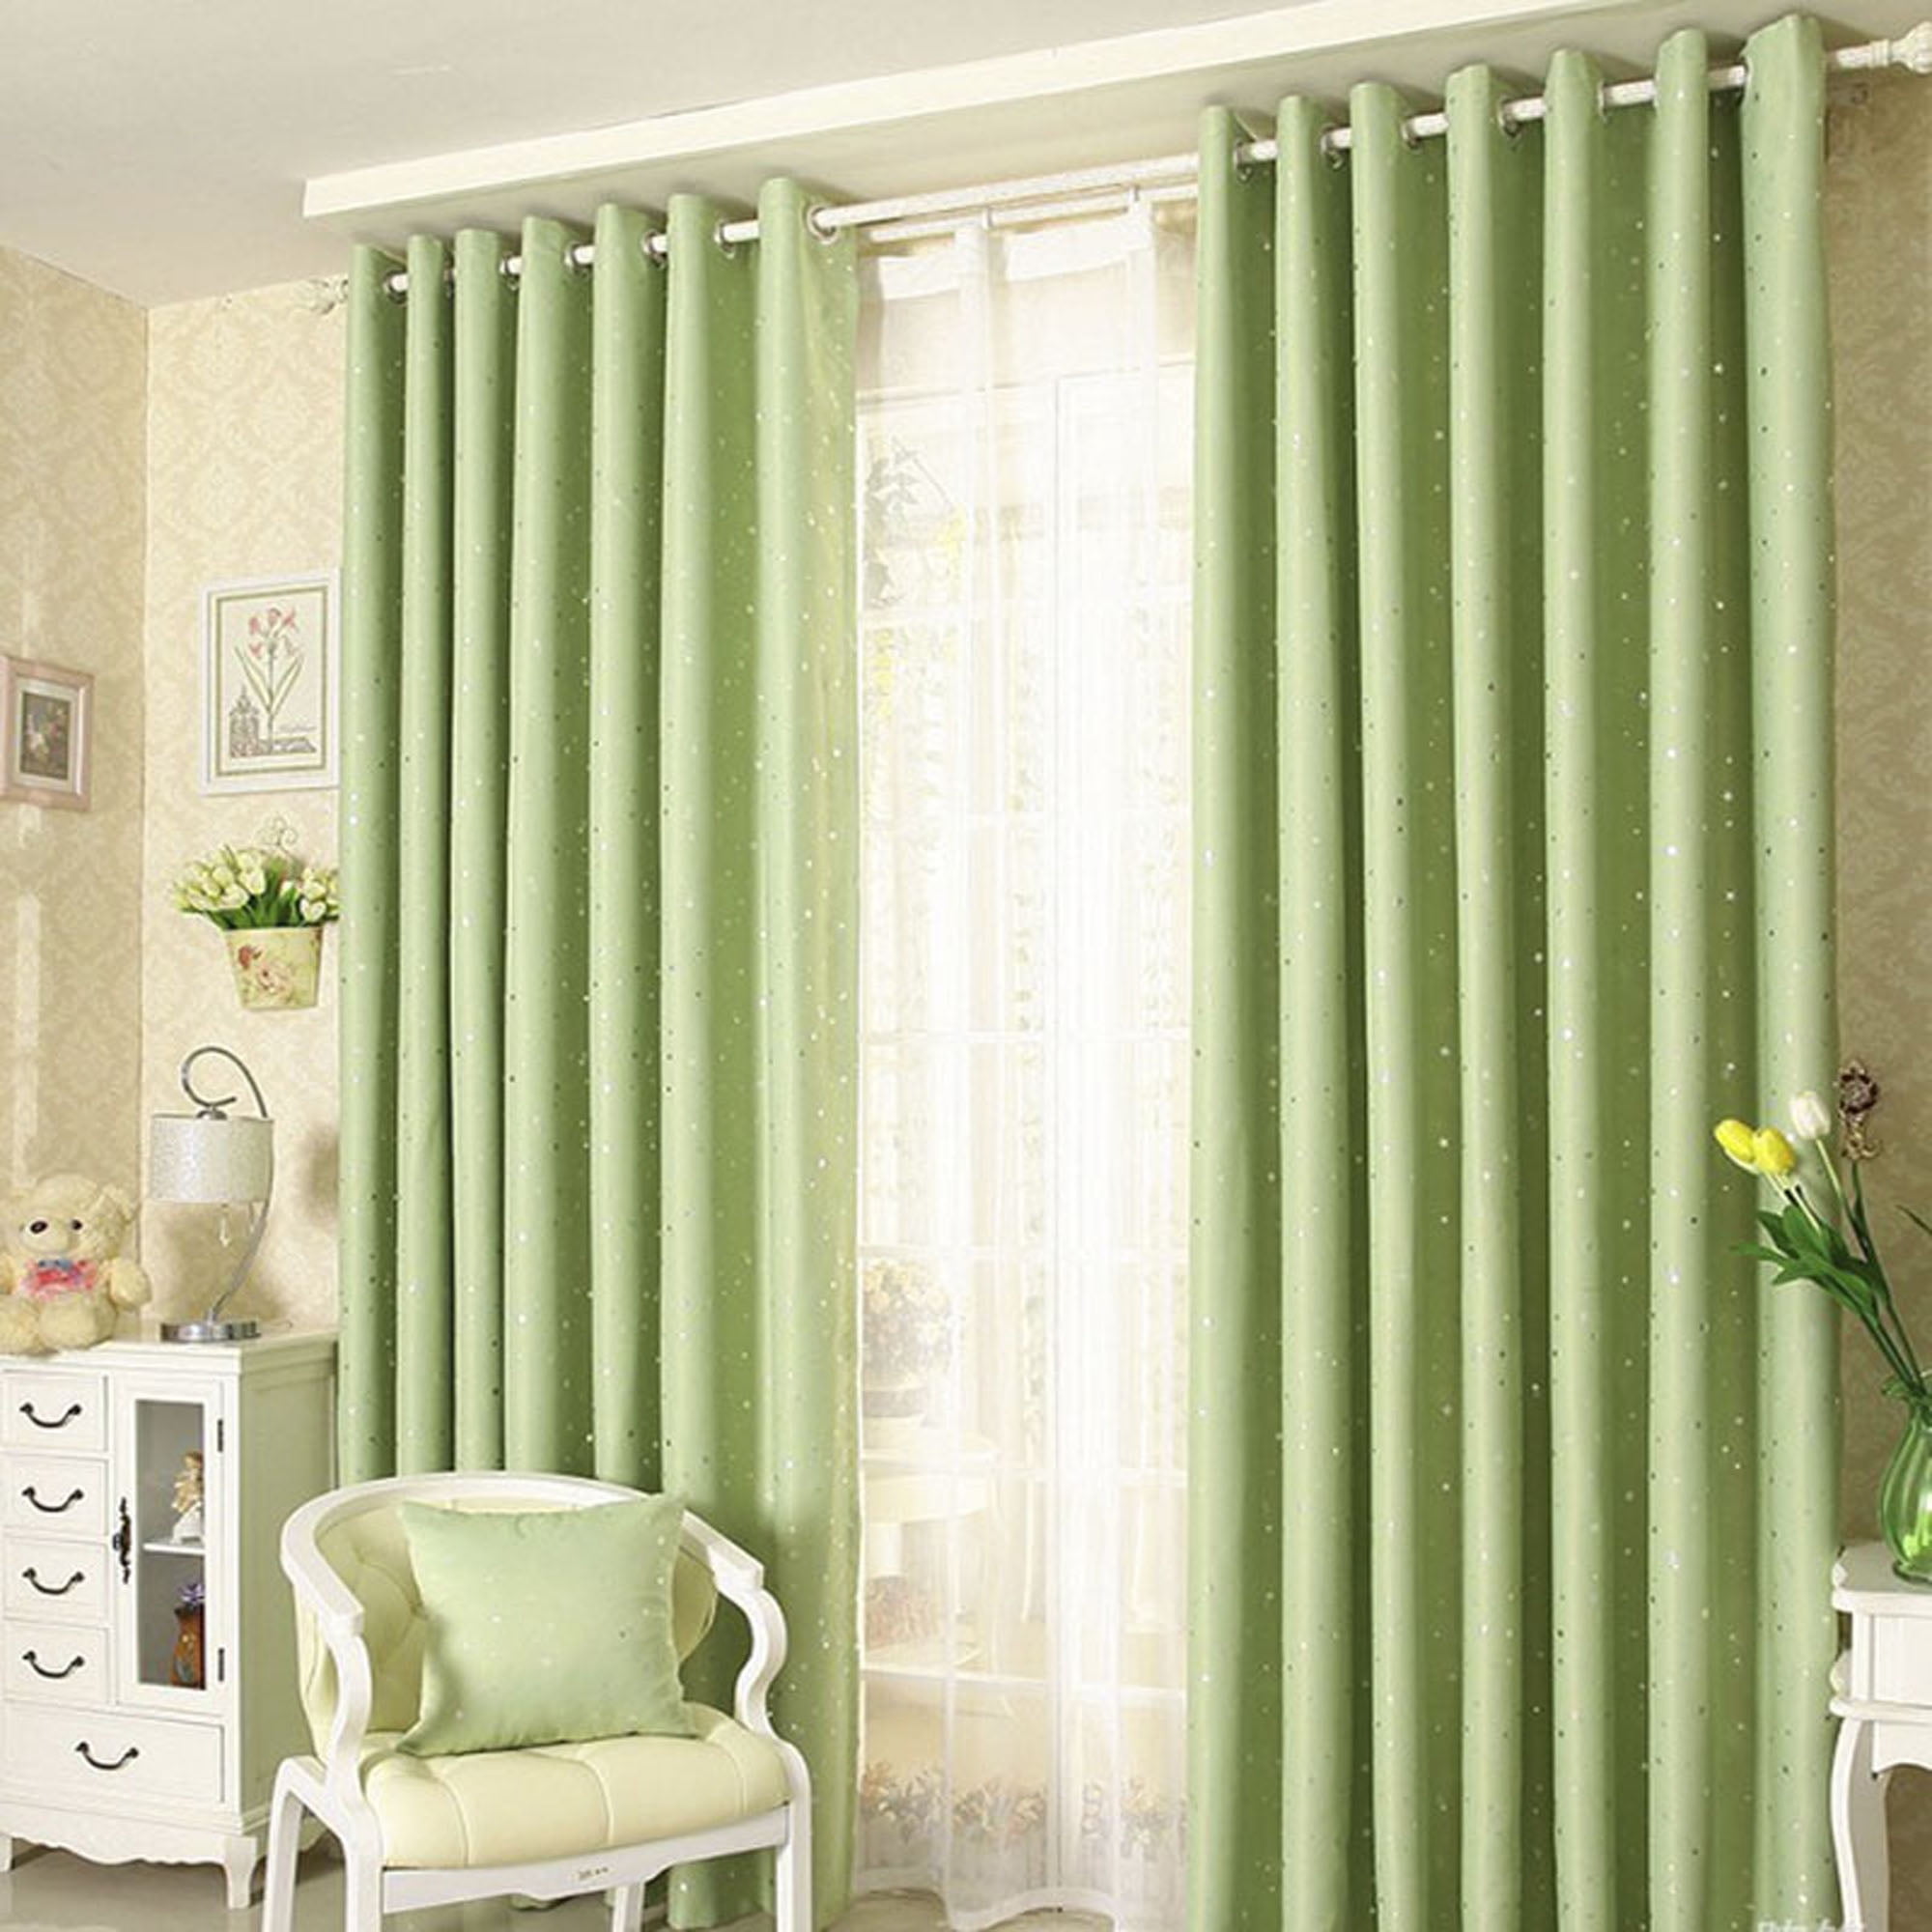 NK HOME Blackout Curtains, Curtains for Bedroom Room